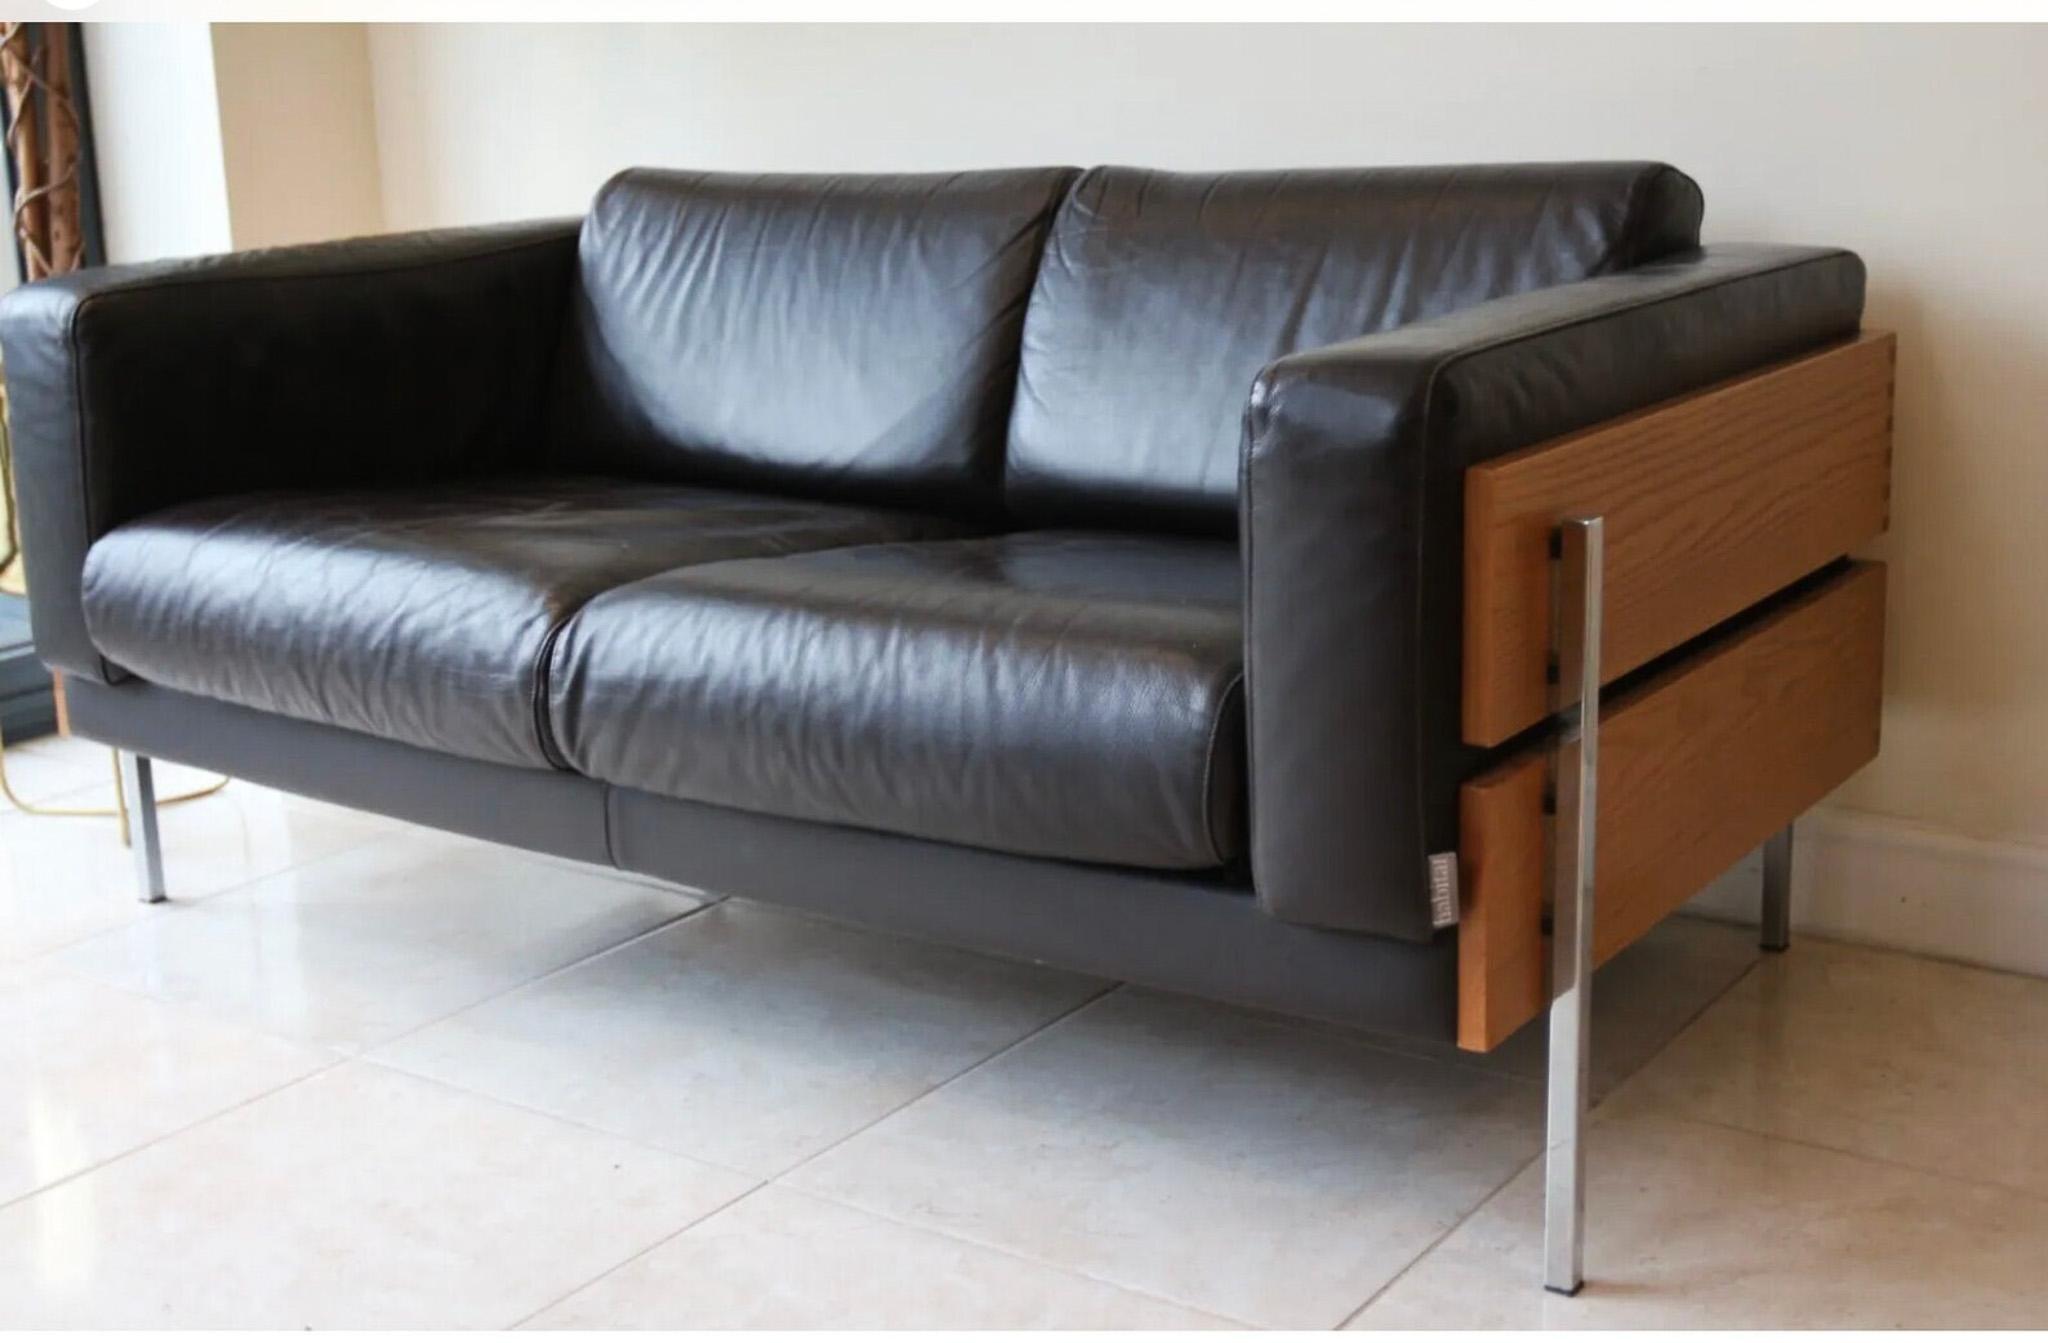 A vintage Habitat sofa designed by Robin Day originally manufactured for Hille.

This vintage dark brown leather sofa is perfect for adding a touch of character to your living space.

Crafted from high-quality materials, this two-seater sofa is